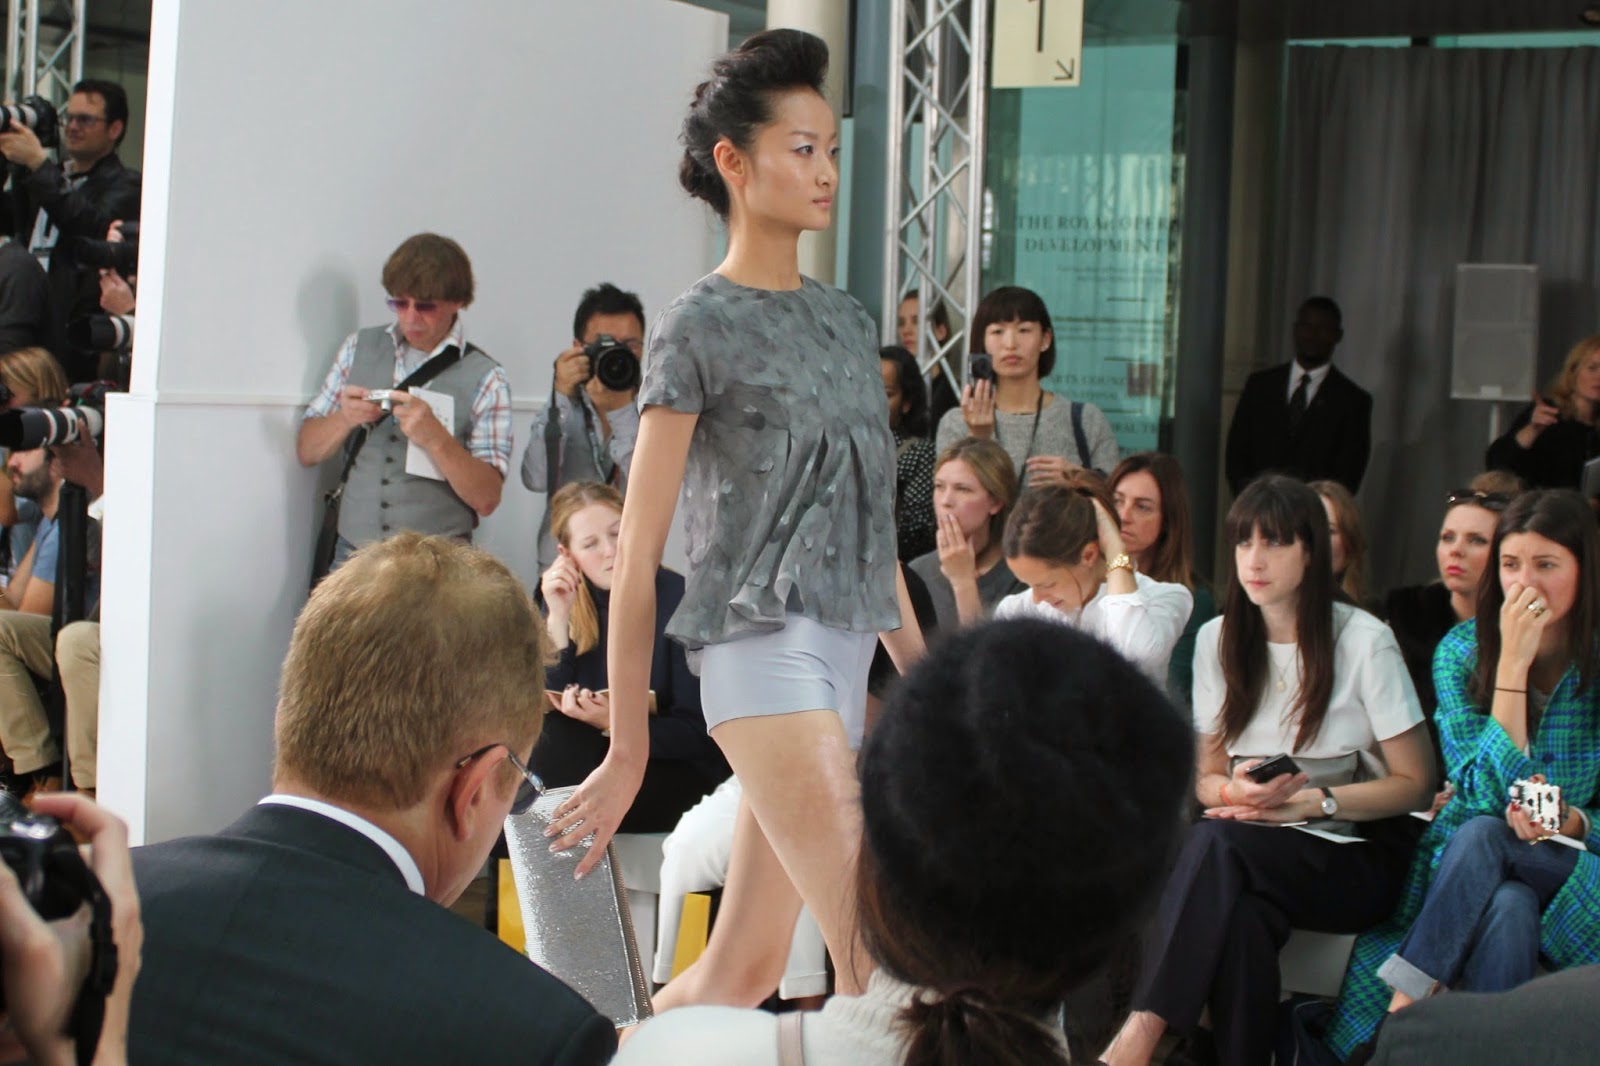 london-fashion-week-2014-lfw-DAKS-show-catwalk-spring-summer-2015-models-clothes-fashion-frow-royal-opera-house-top-shorts-feathers